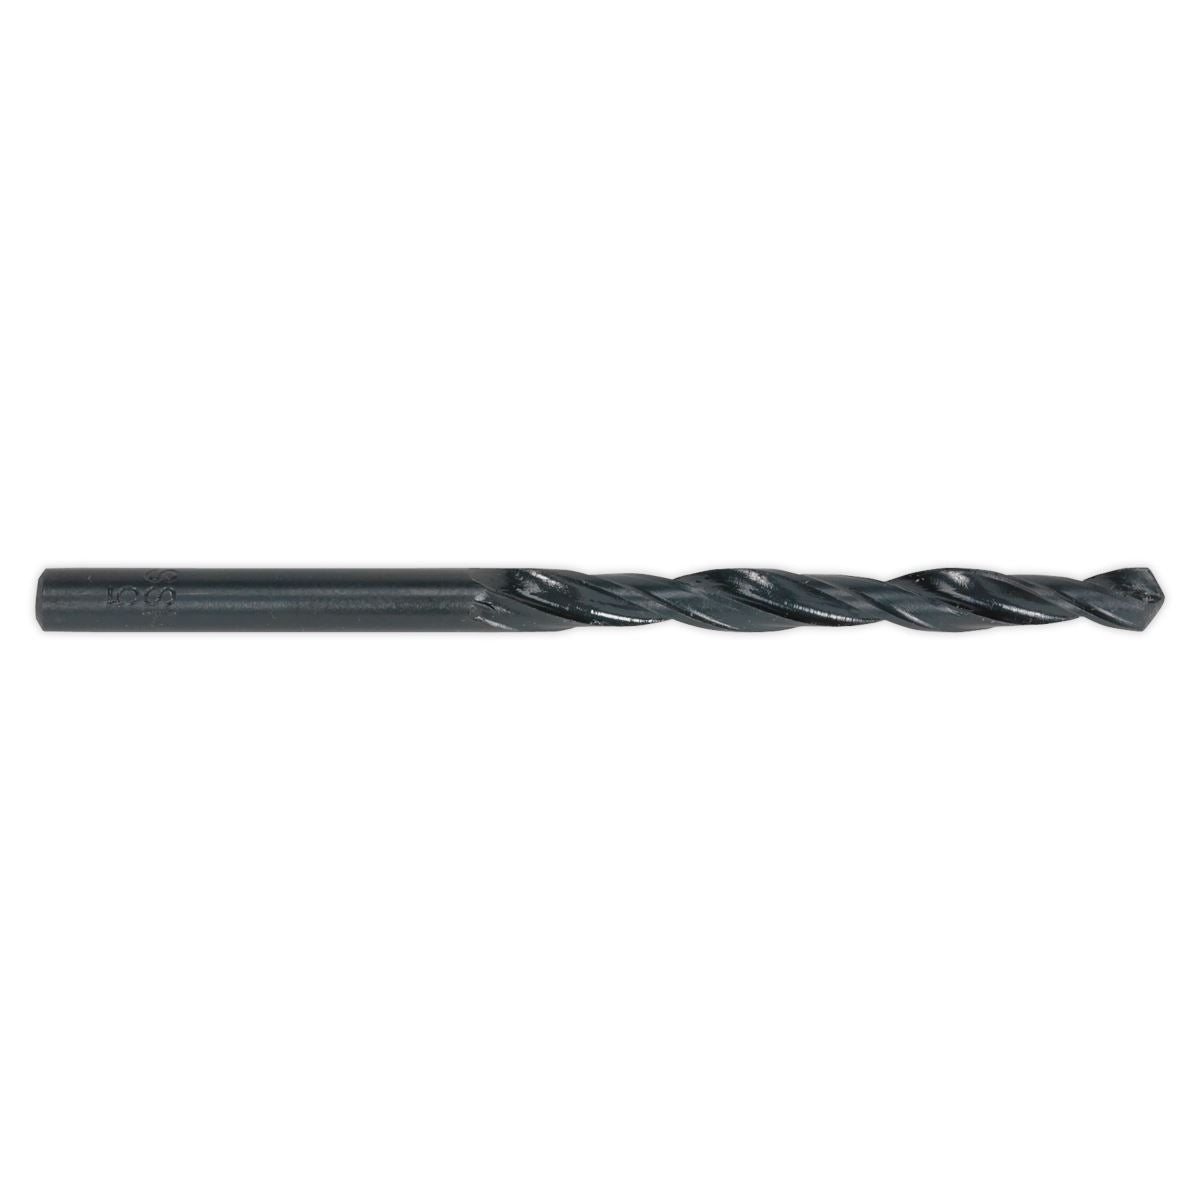 Sealey HSS Roll Forged Drill Bit Ø9mm Pack of 10